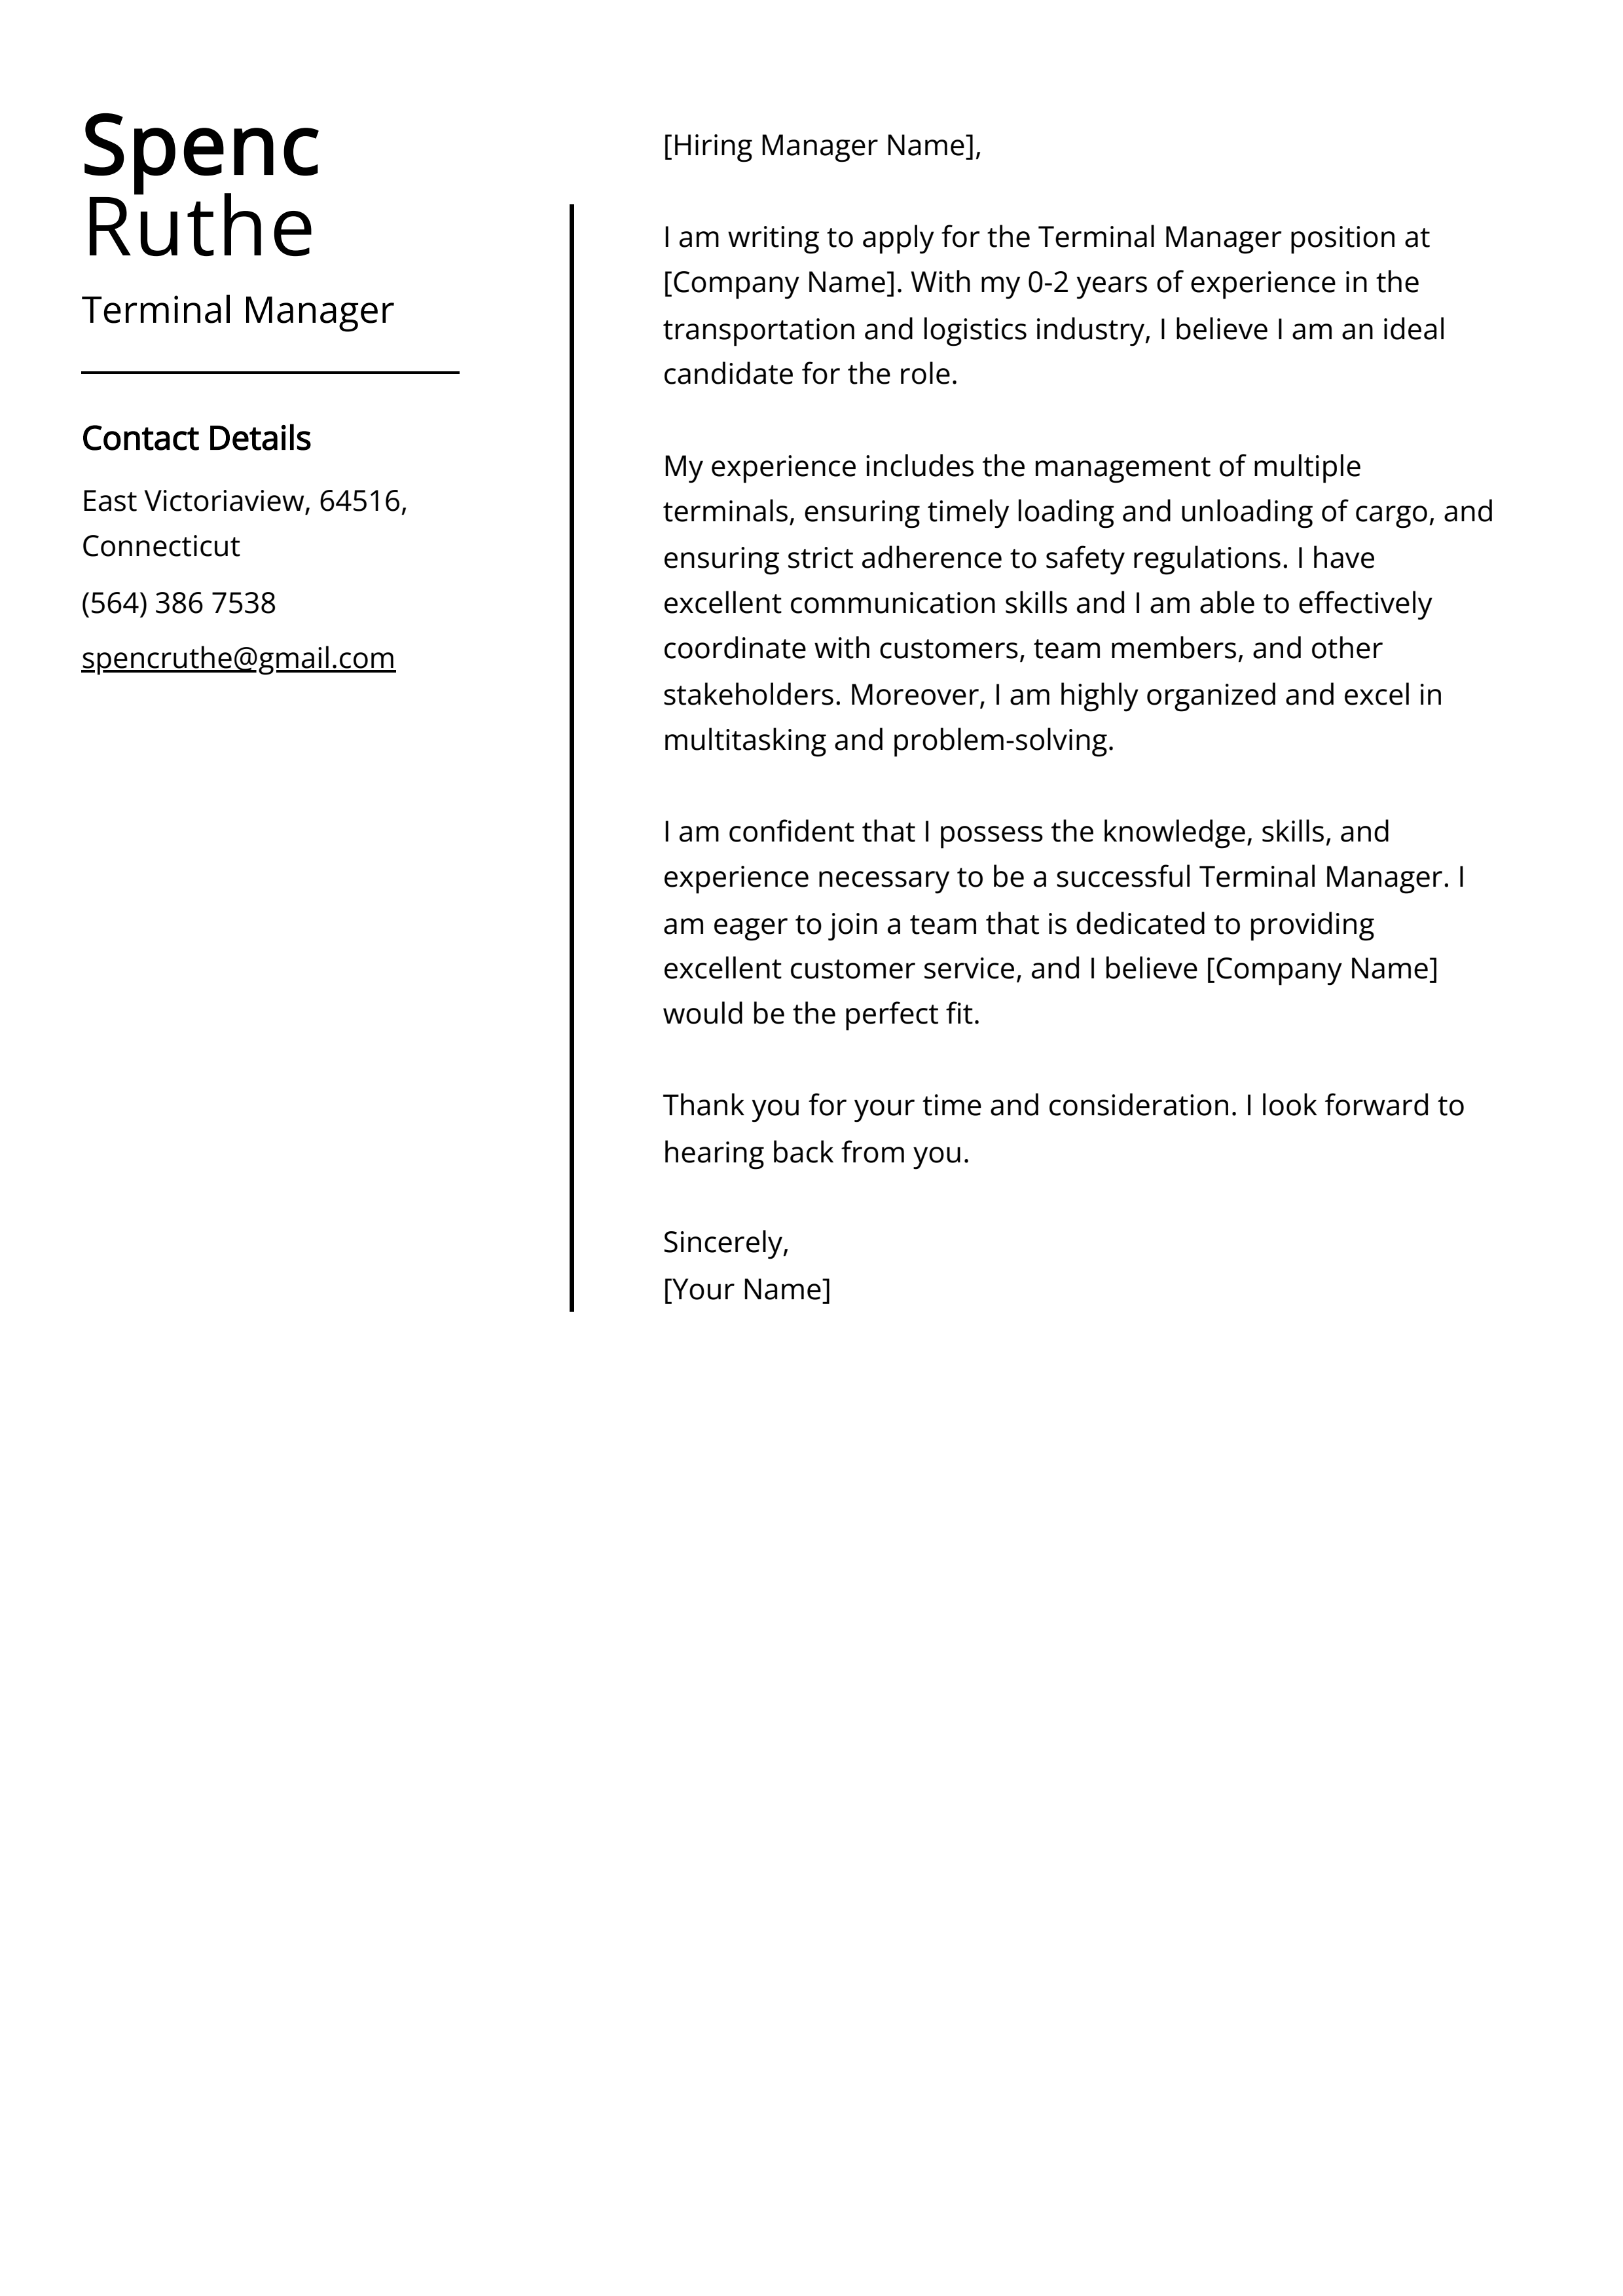 Terminal Manager Cover Letter Example